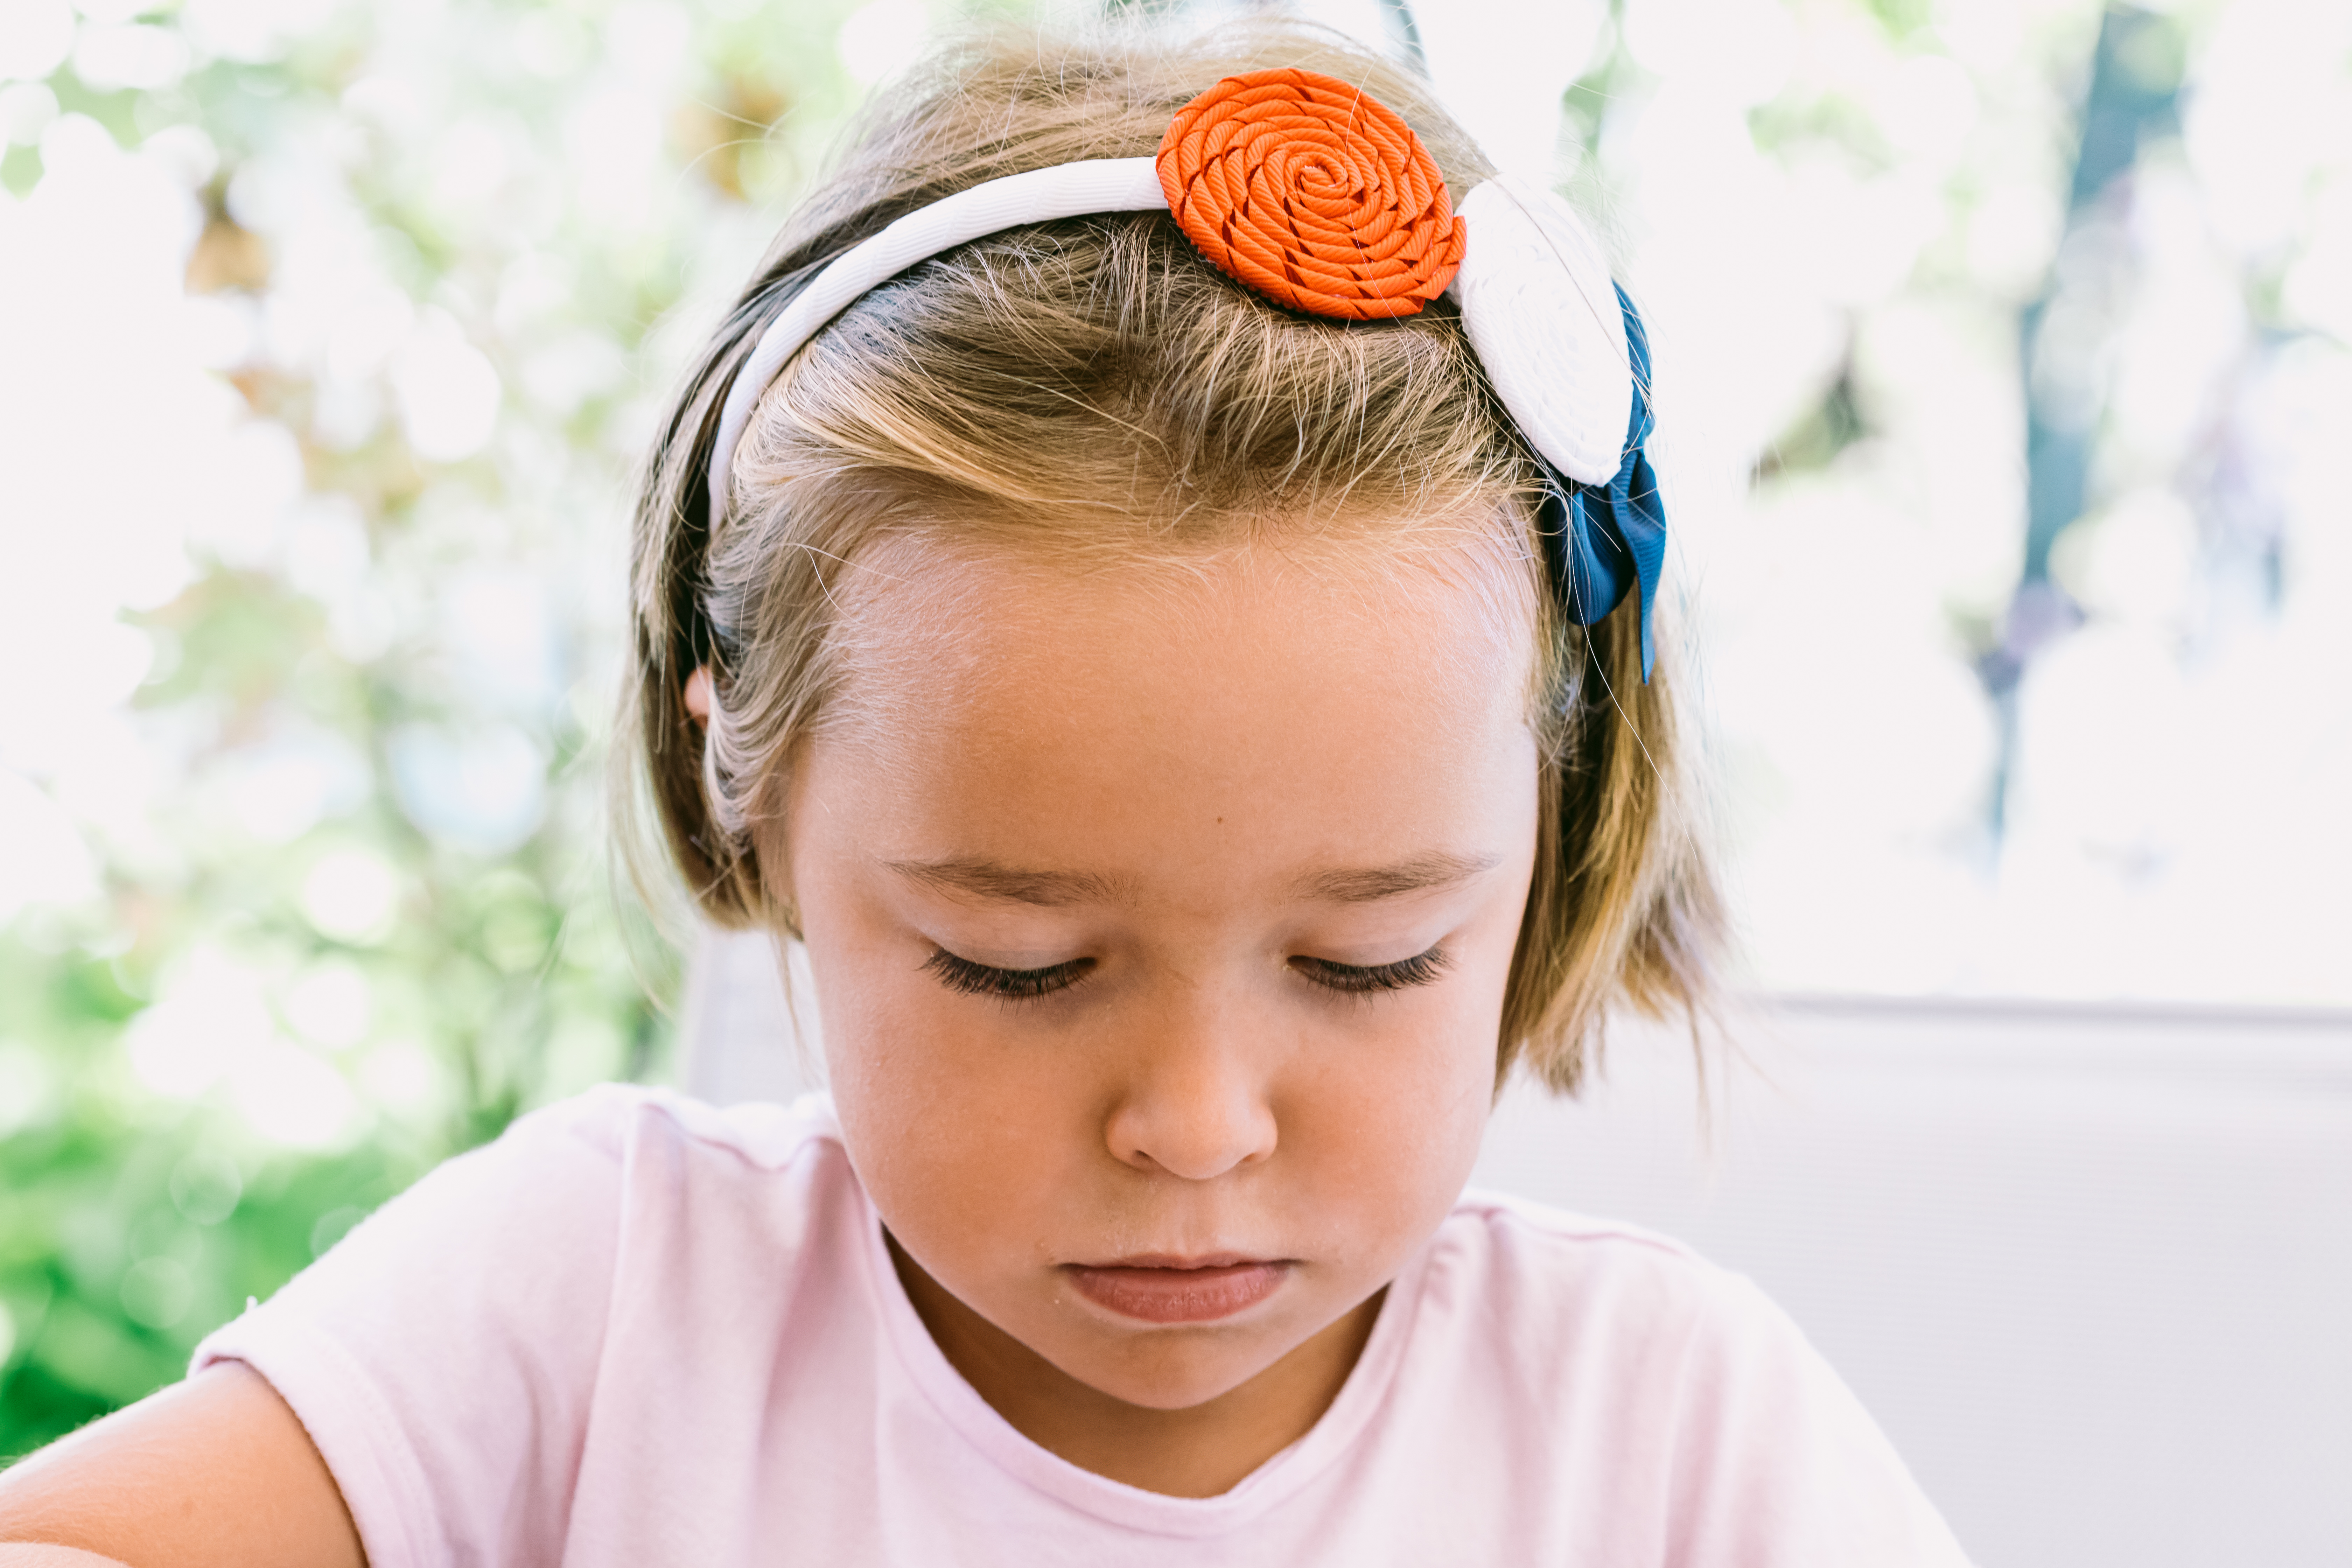 Portrait of a serious blonde-haired little girl, wearing a white headband with blue, red and white decorations, with a garden in the background | Source: Getty Images